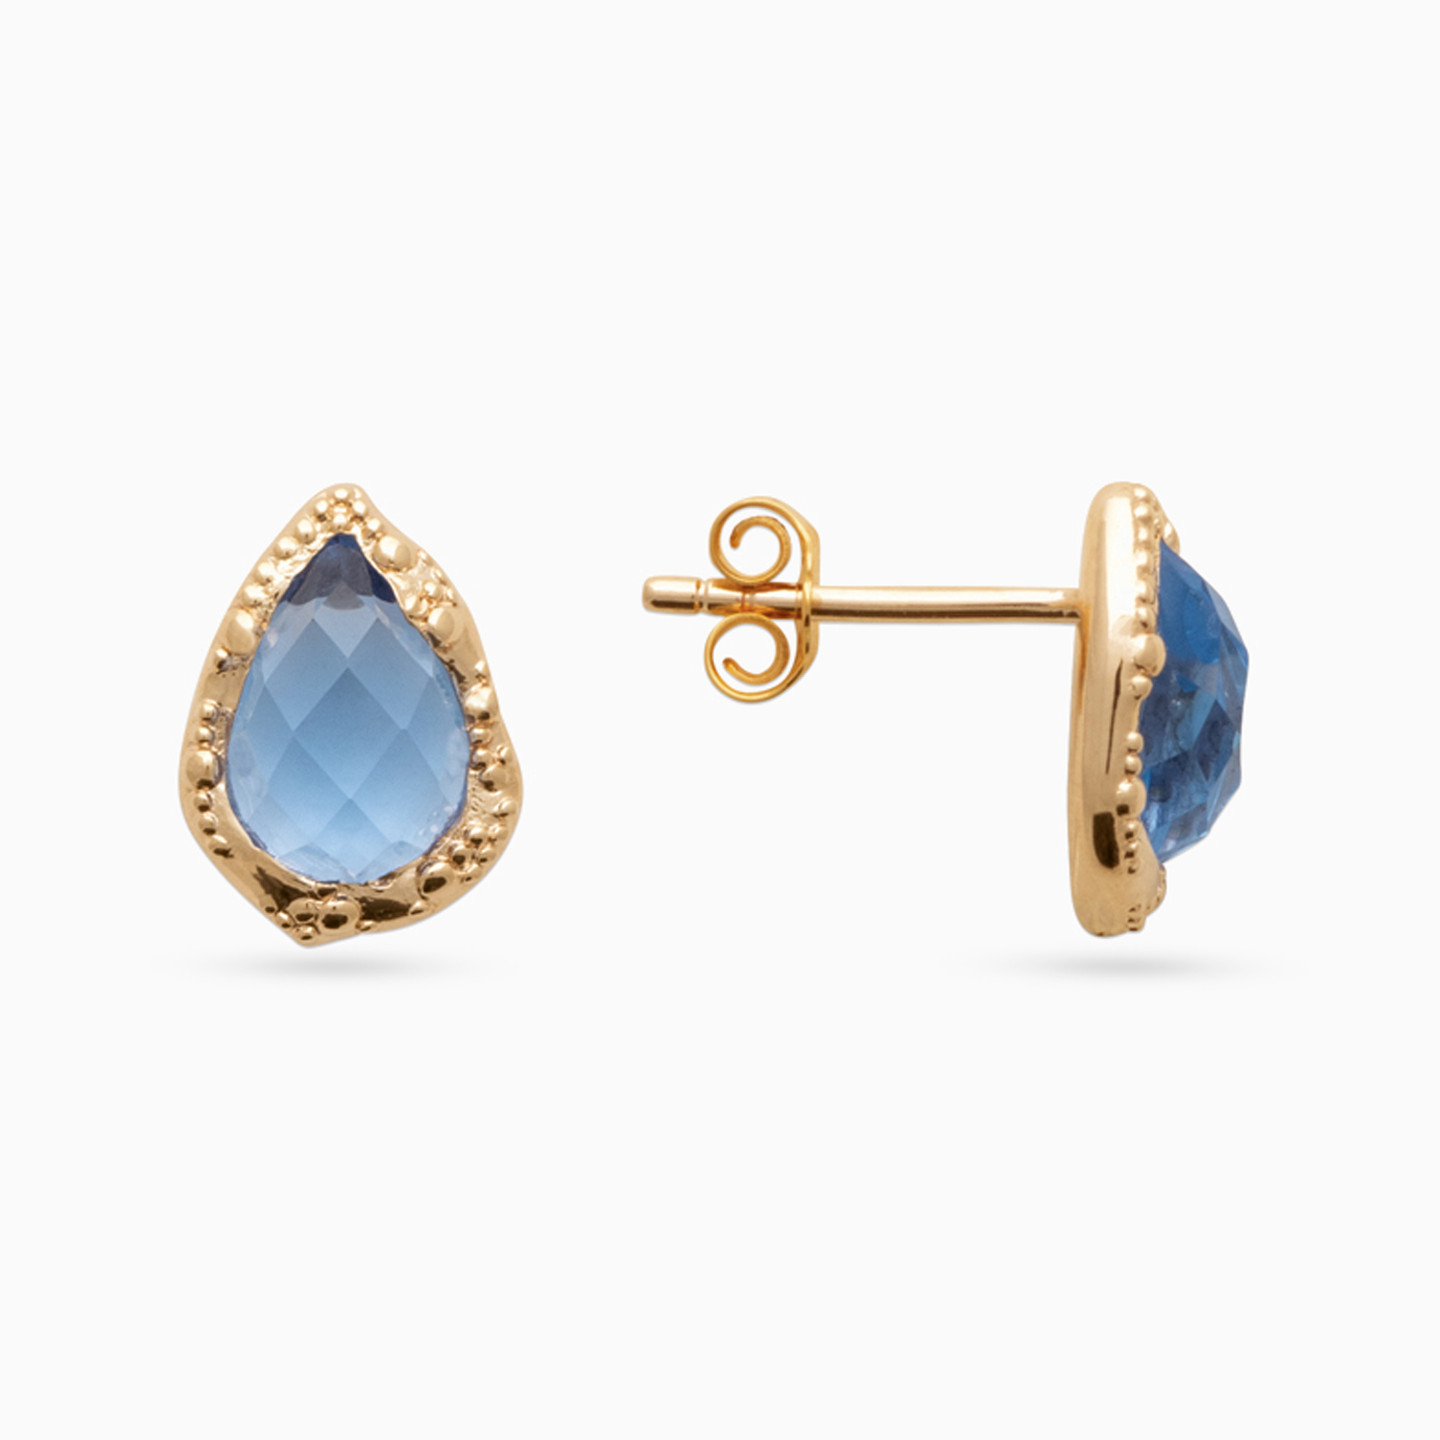 Gold Plated Colored Stones Stud Earrings - 2